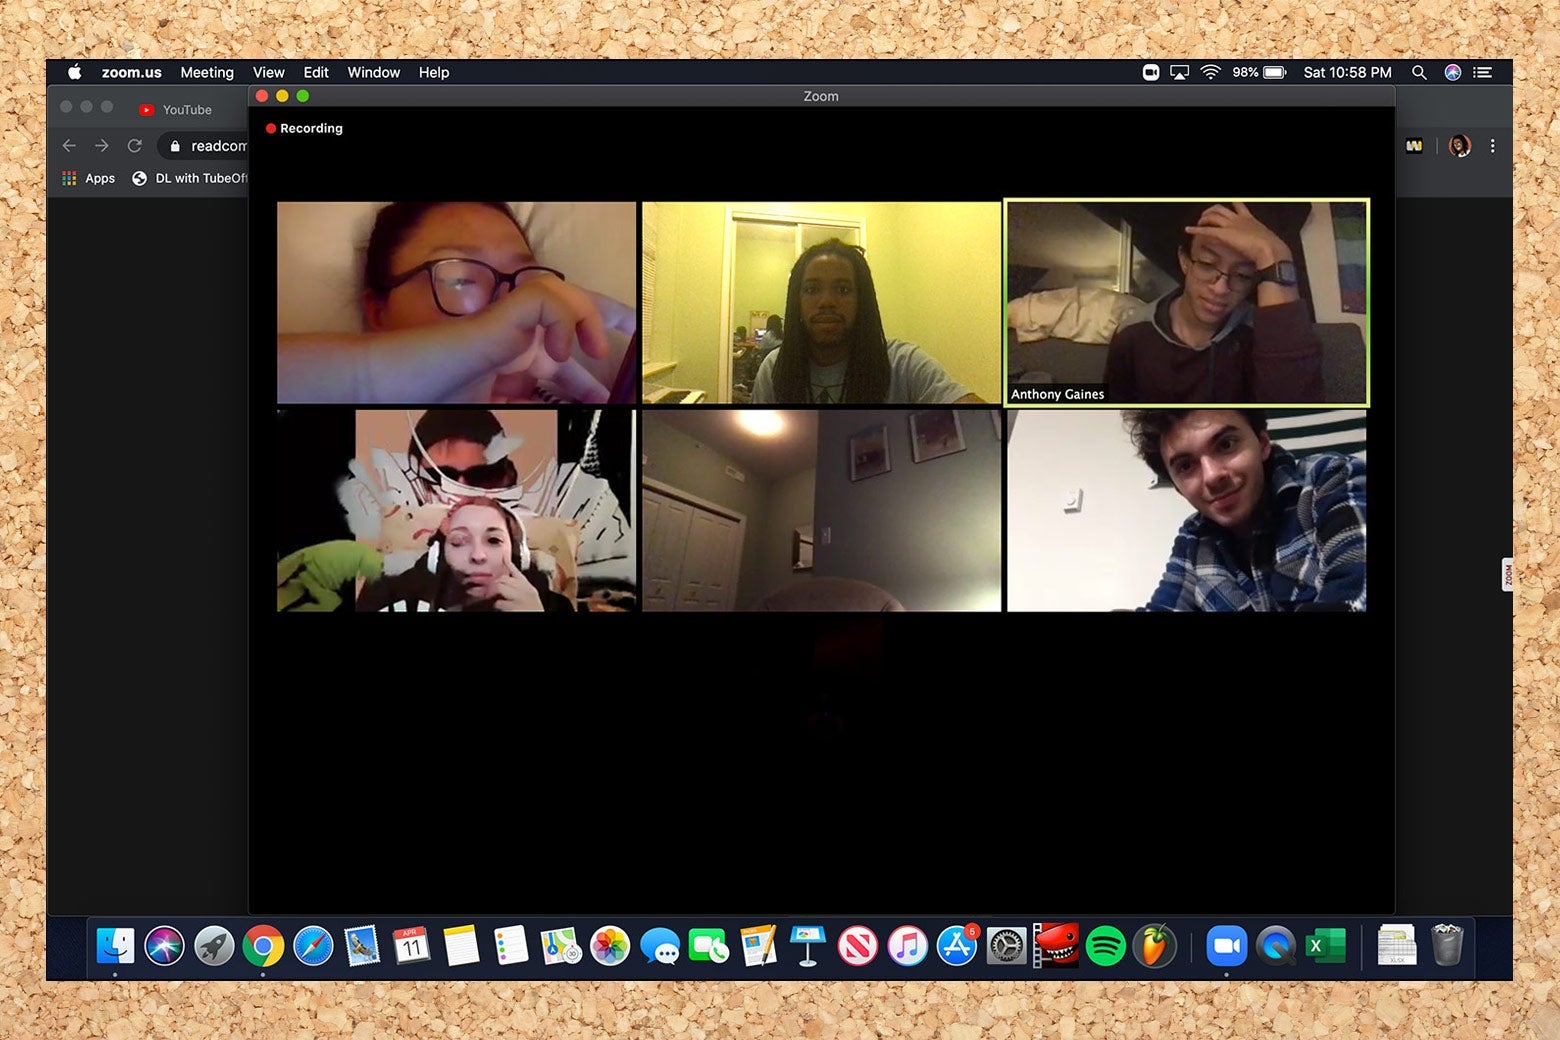 Miké and his friends hanging out on zoom.